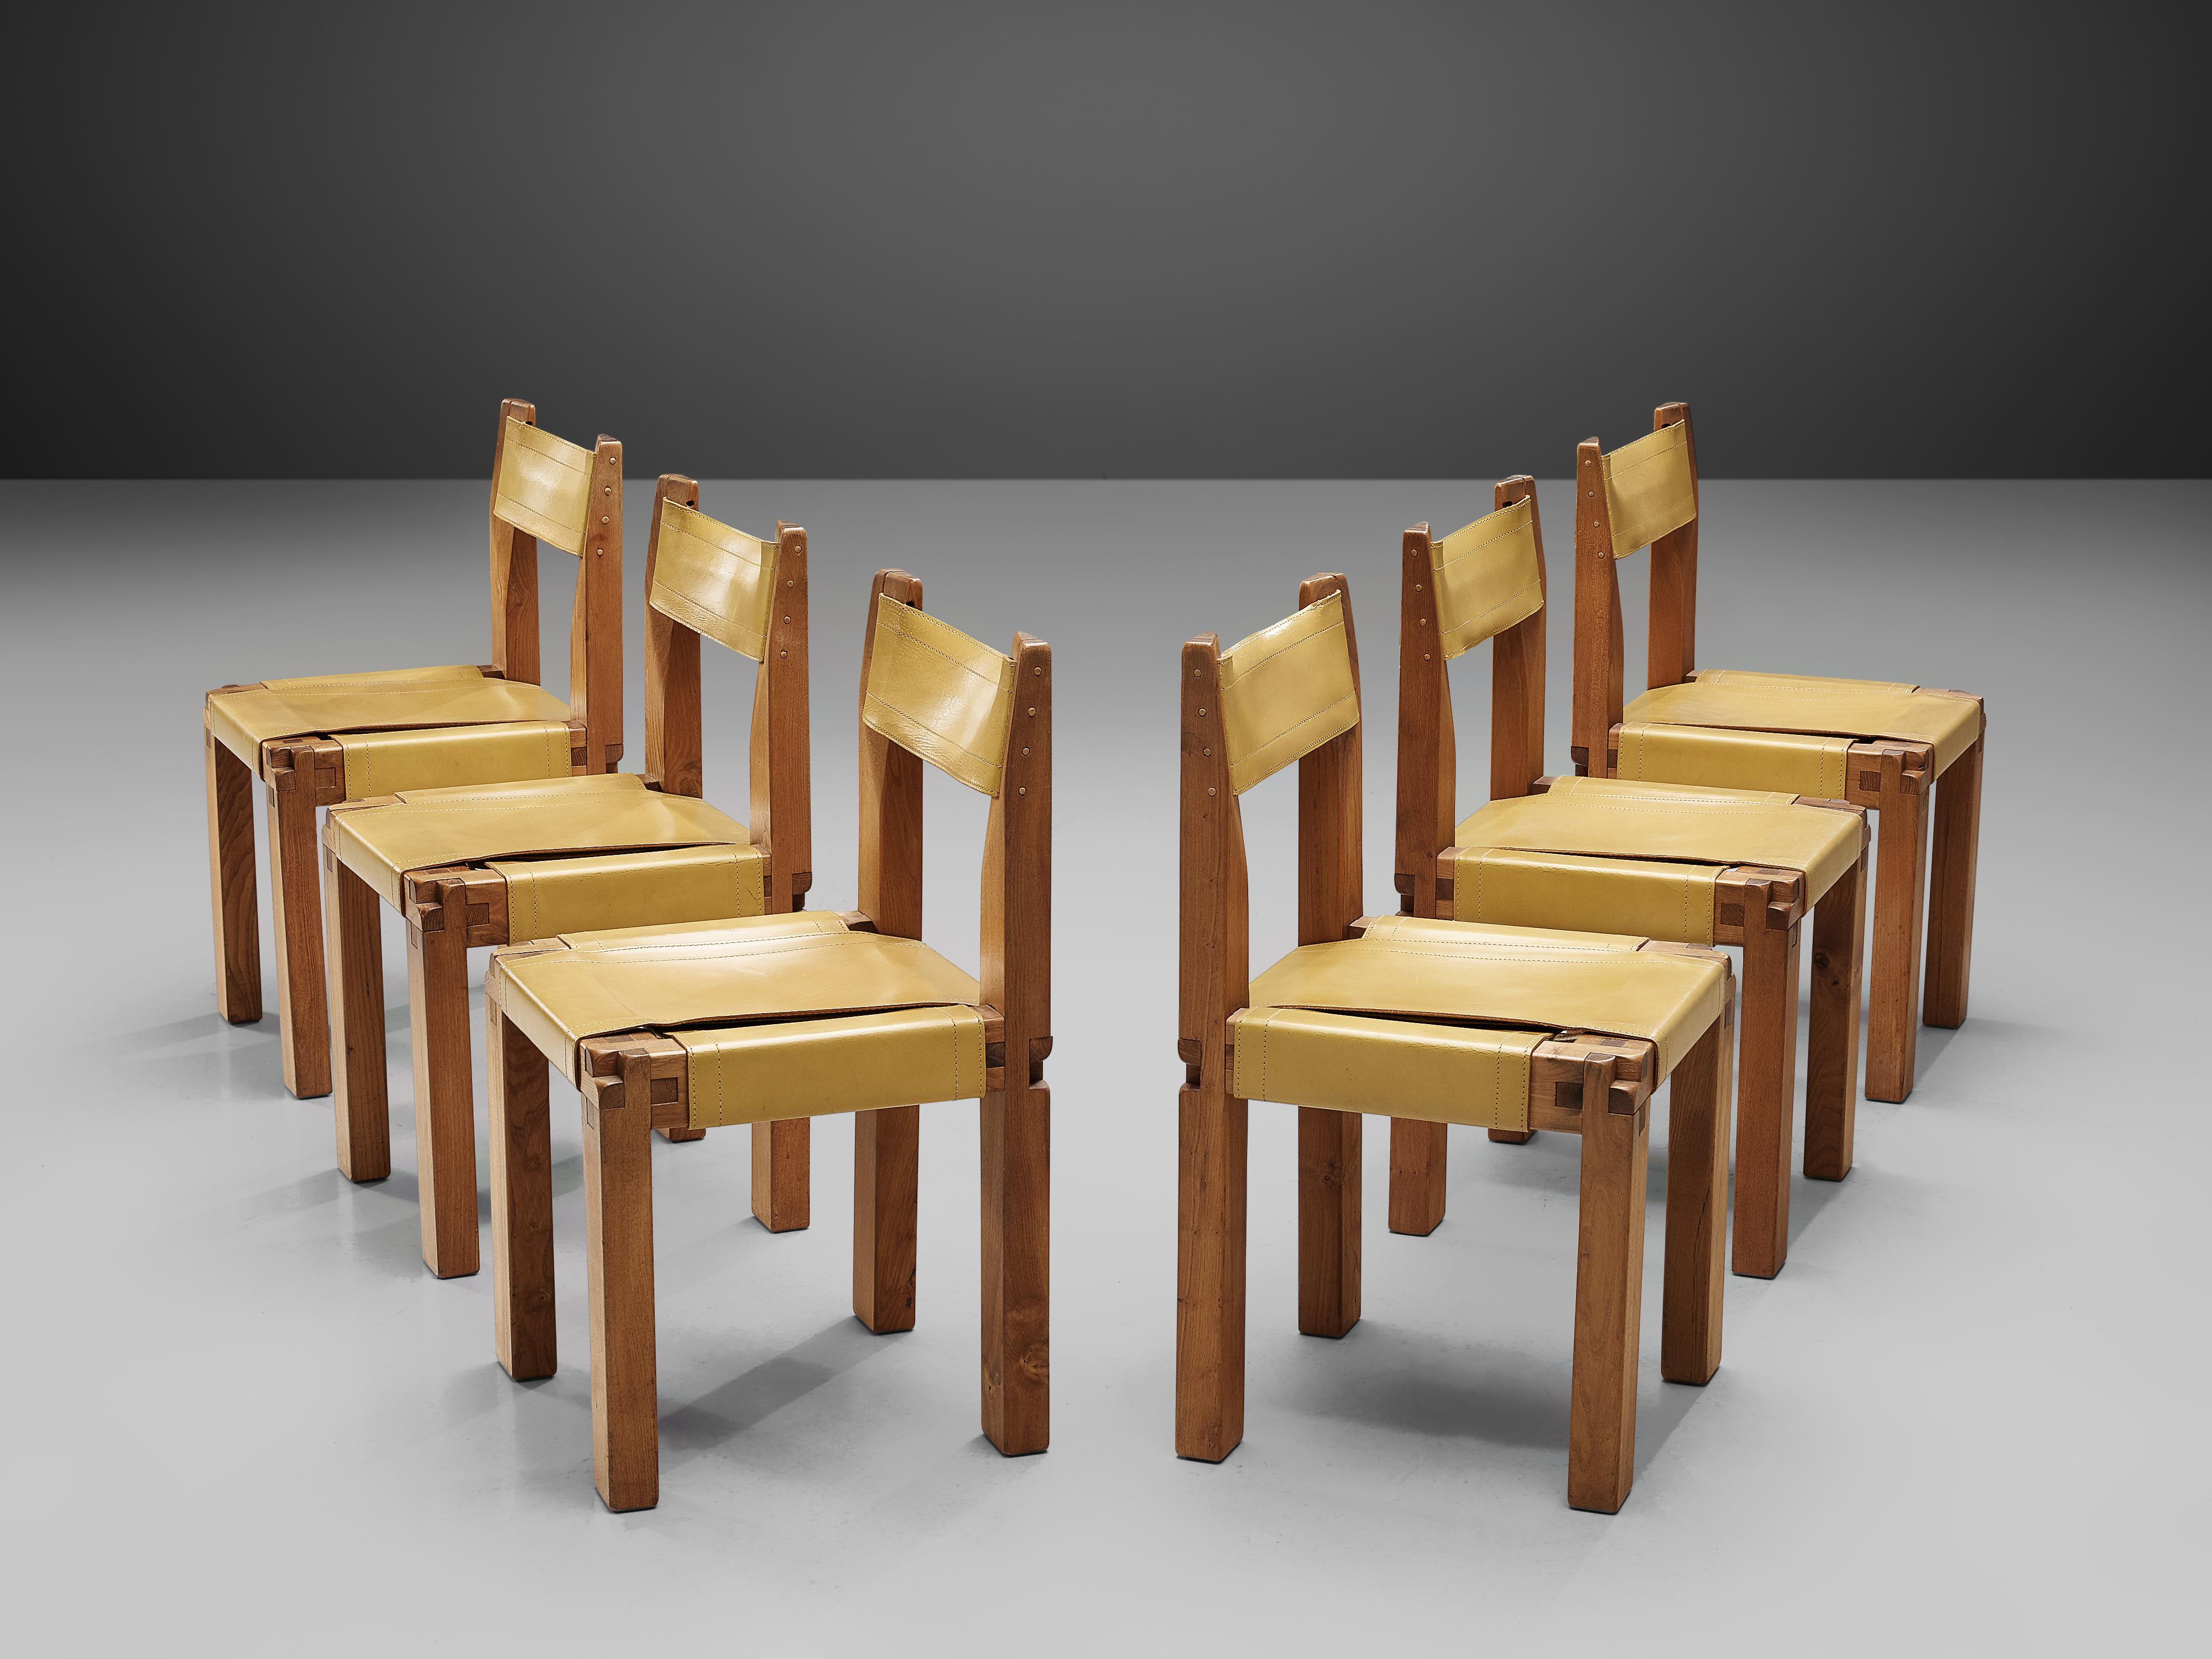 Pierre Chapo, set of six dining chairs, model S11, elm, yellow coloured leather, France, circa 1966

A set of six chairs in solid elm wood and yellow coloured saddle leather, which makes this set rare. French designer Pierre Chapo created the S11